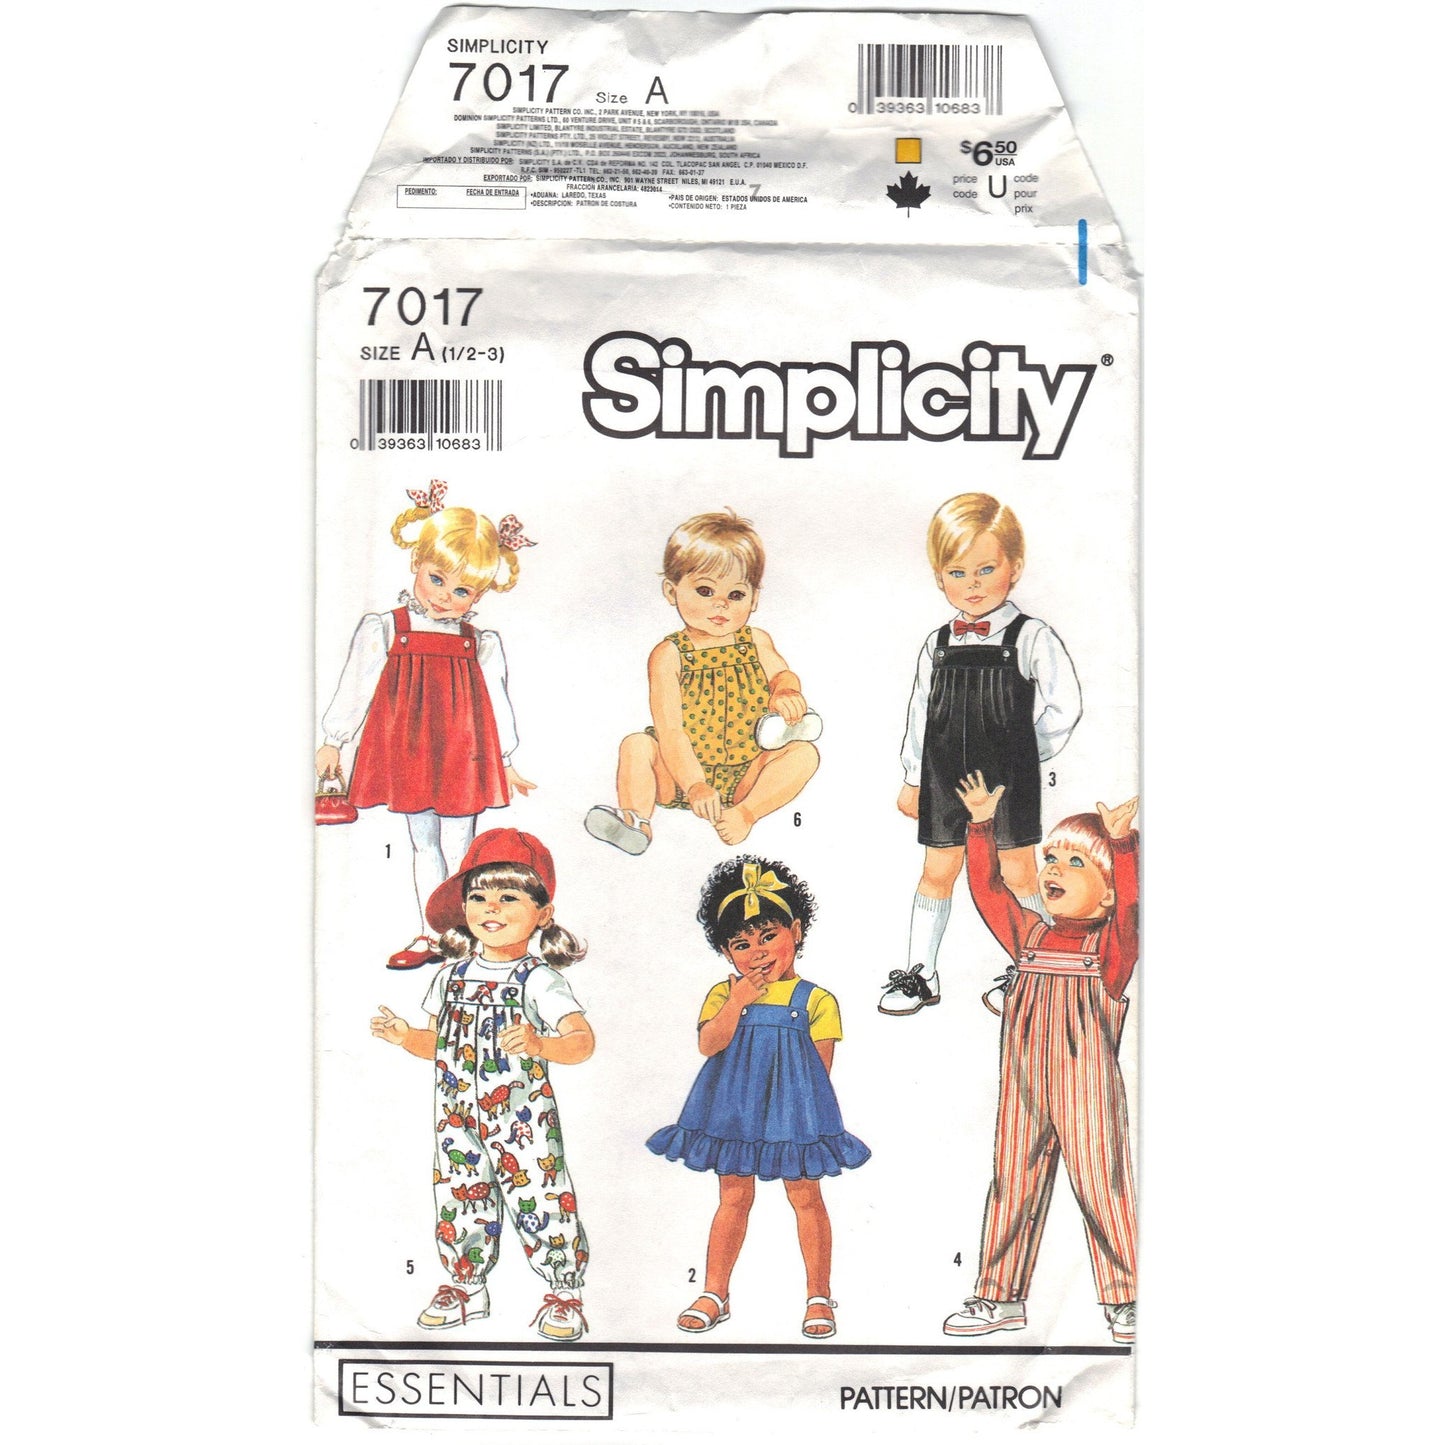 Simplicity 7017 - Toddlers' Overalls in Two Lengths, Sundress, Jumper and Bubble Suit Pattern - Vintage Pattern - Simplicity - SharPharMade - 5